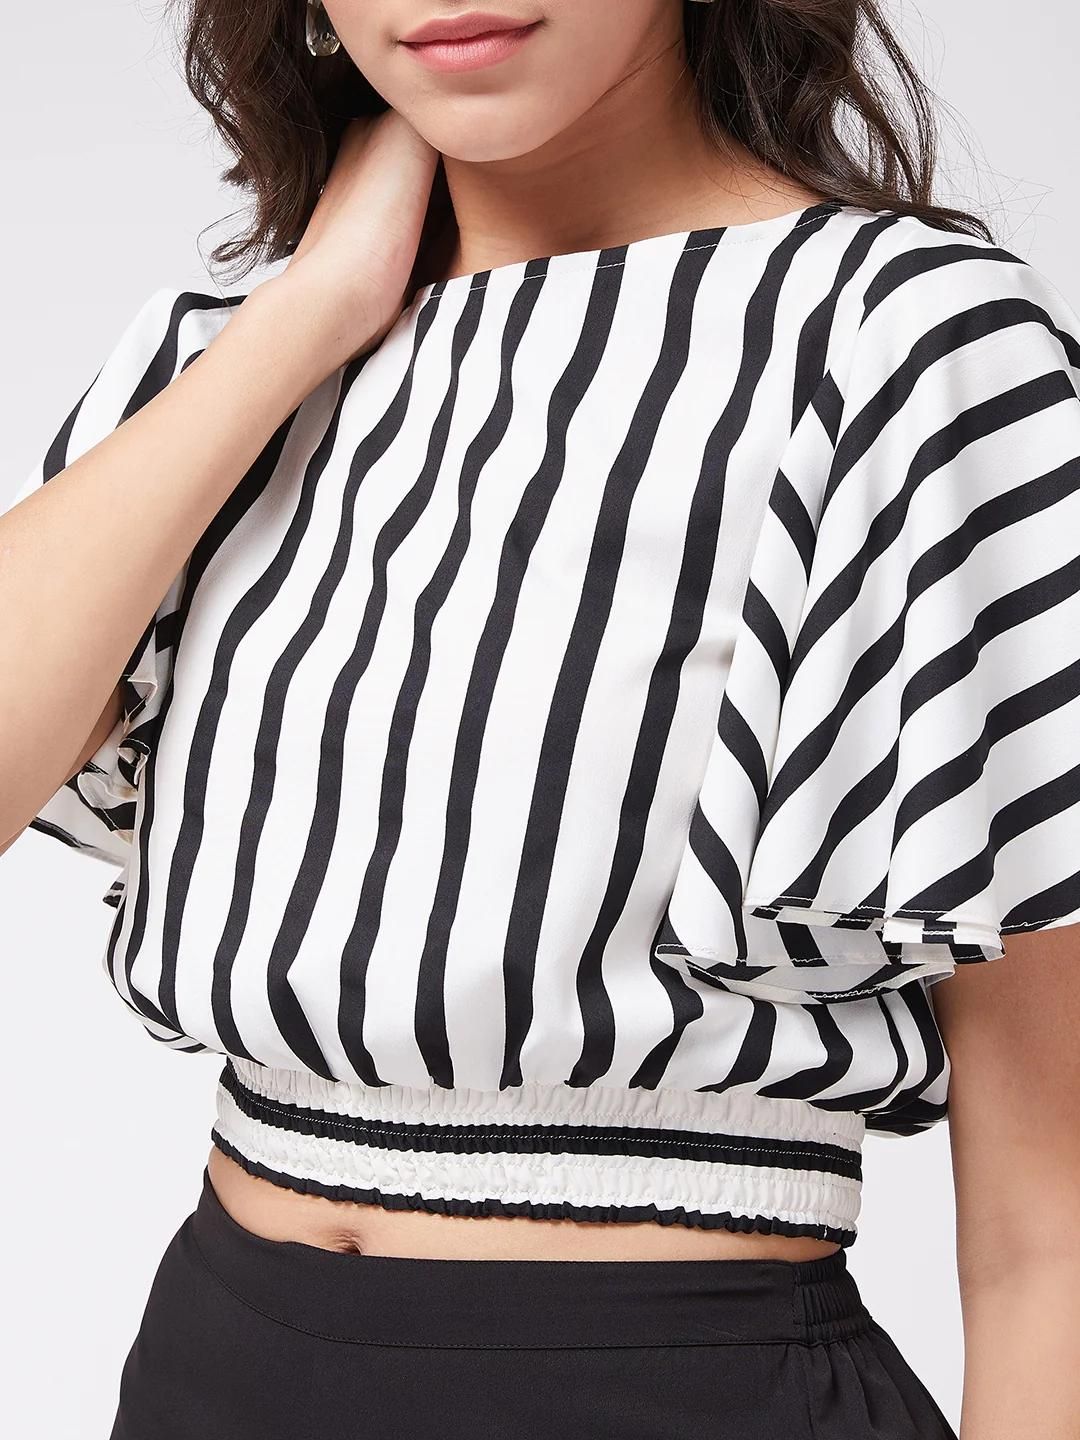 PANNKH Monocromatic Stripes Crop Top With Solid Pants